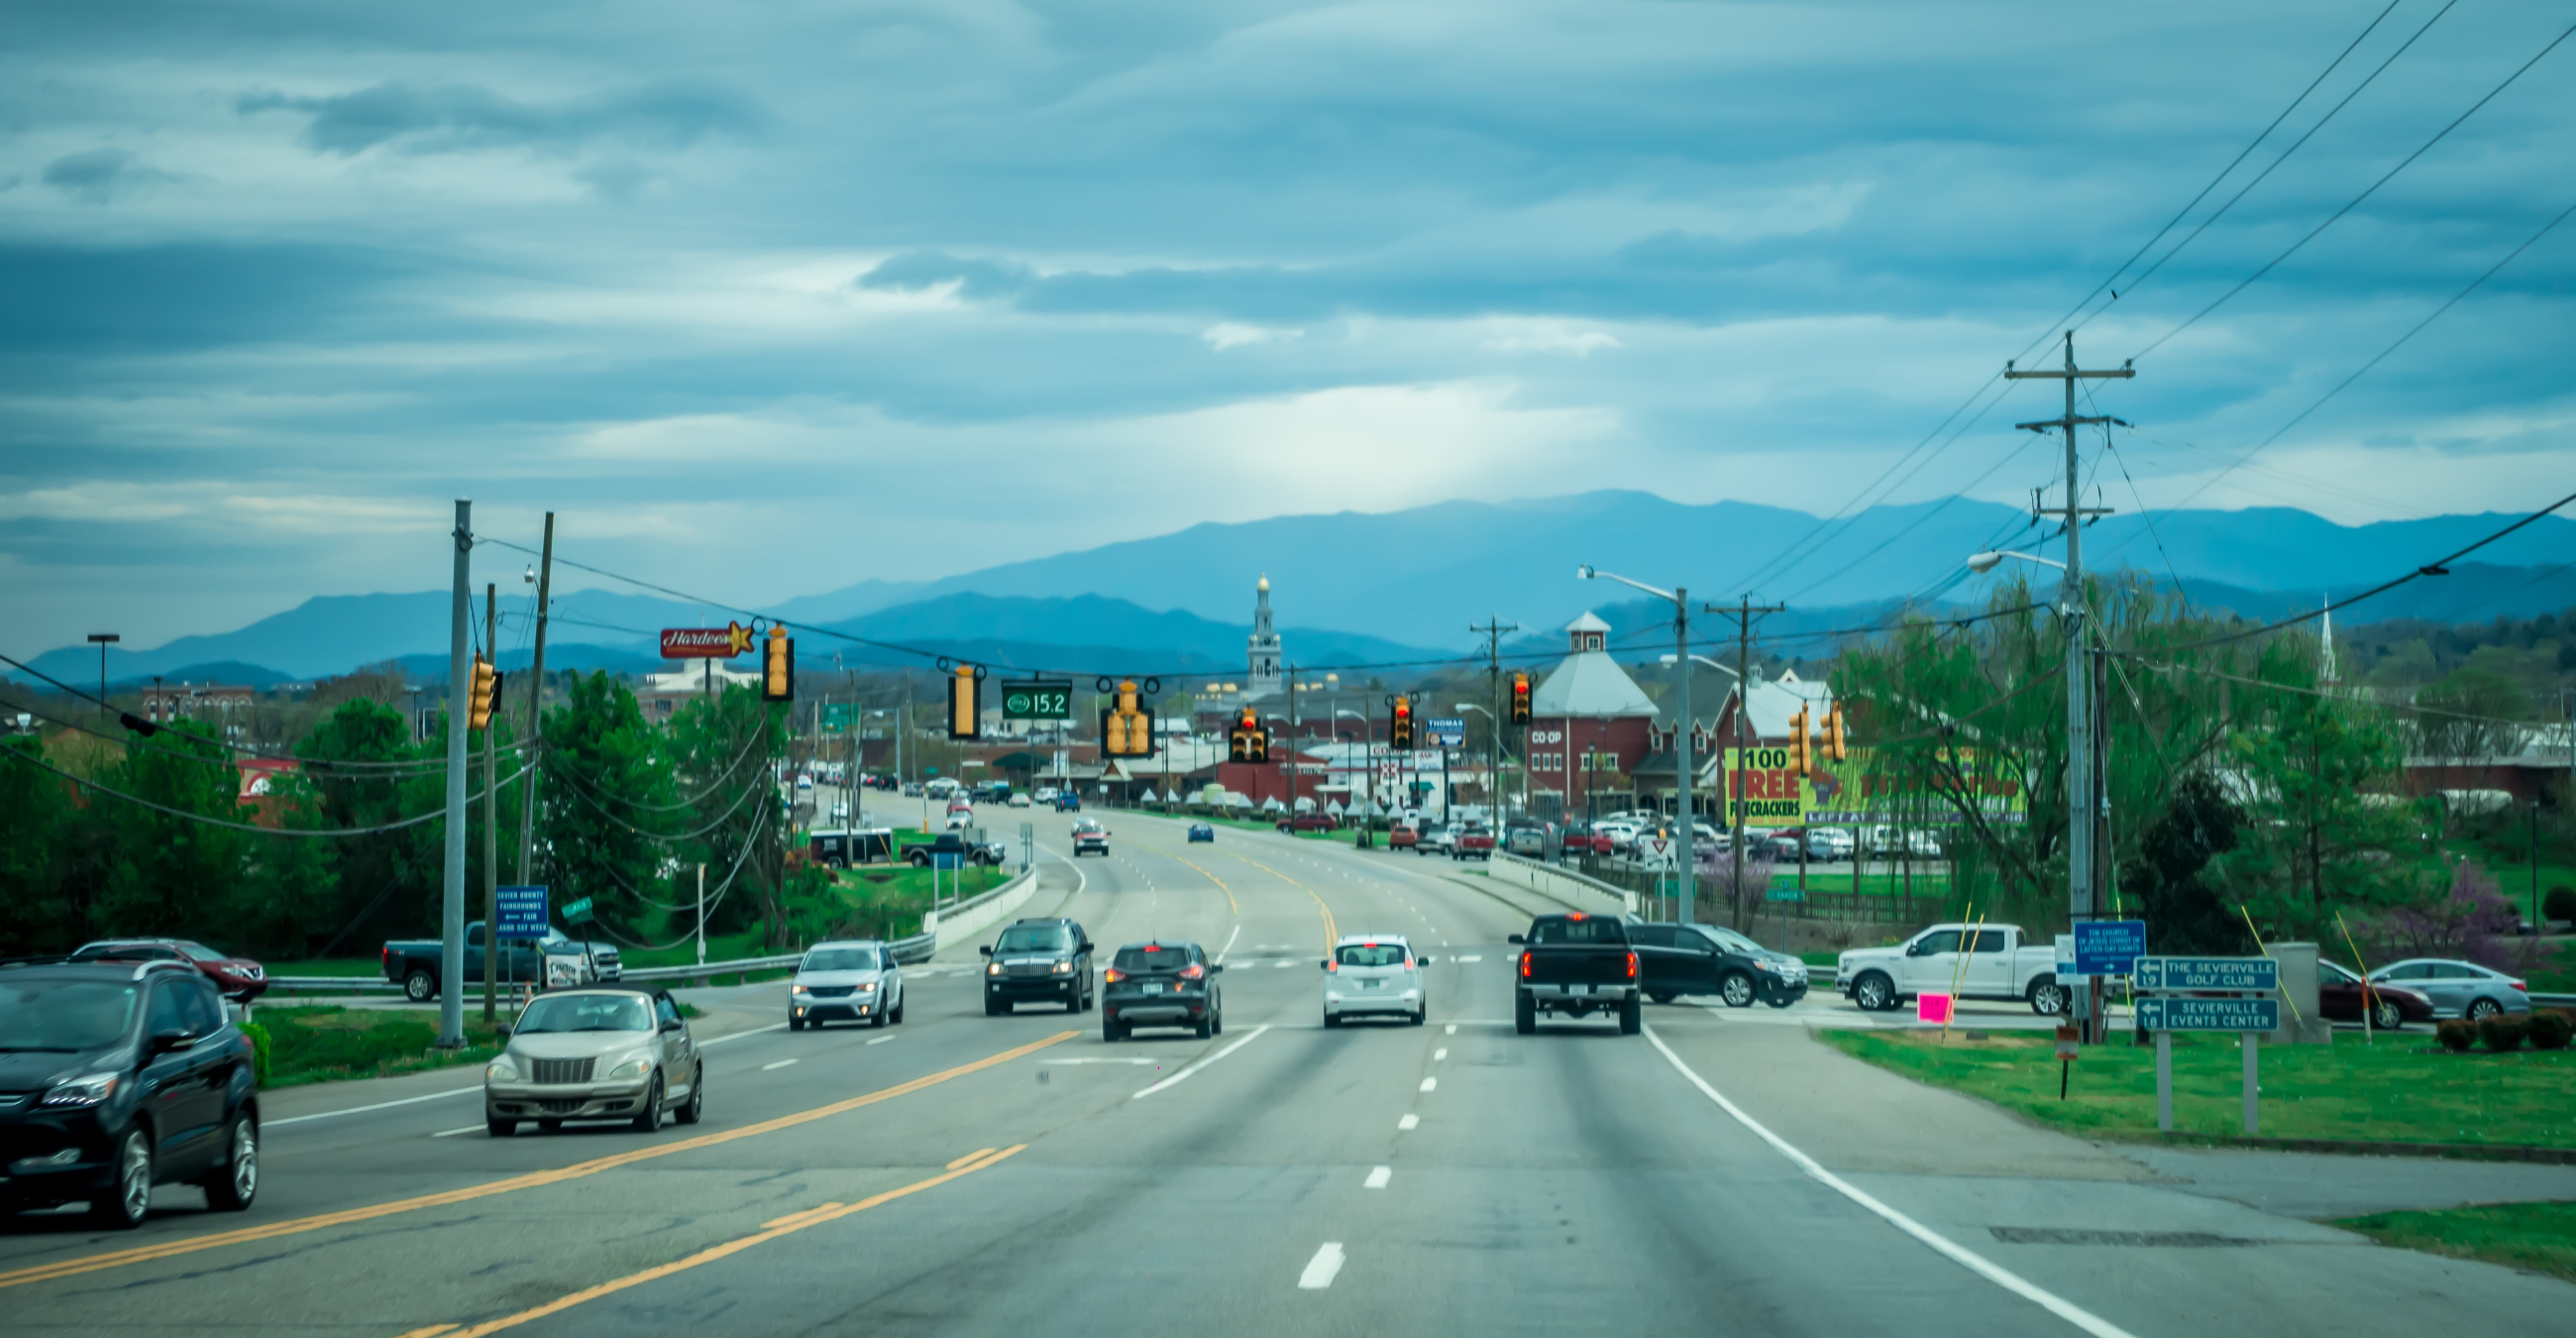 Sevierville, Tennessee